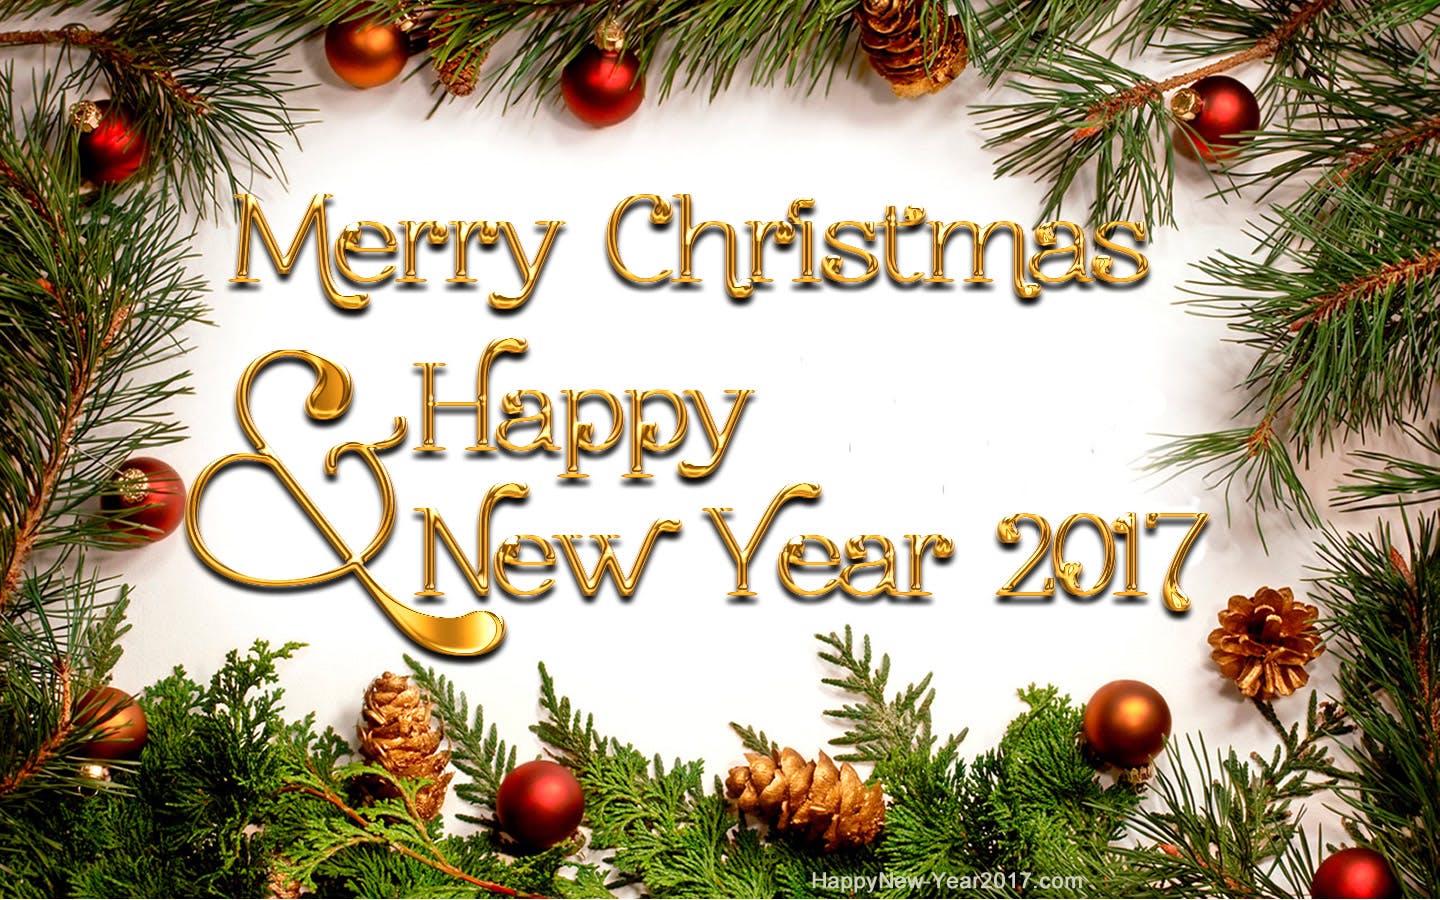 merry-christmas-happy-new-year-2017-decoration